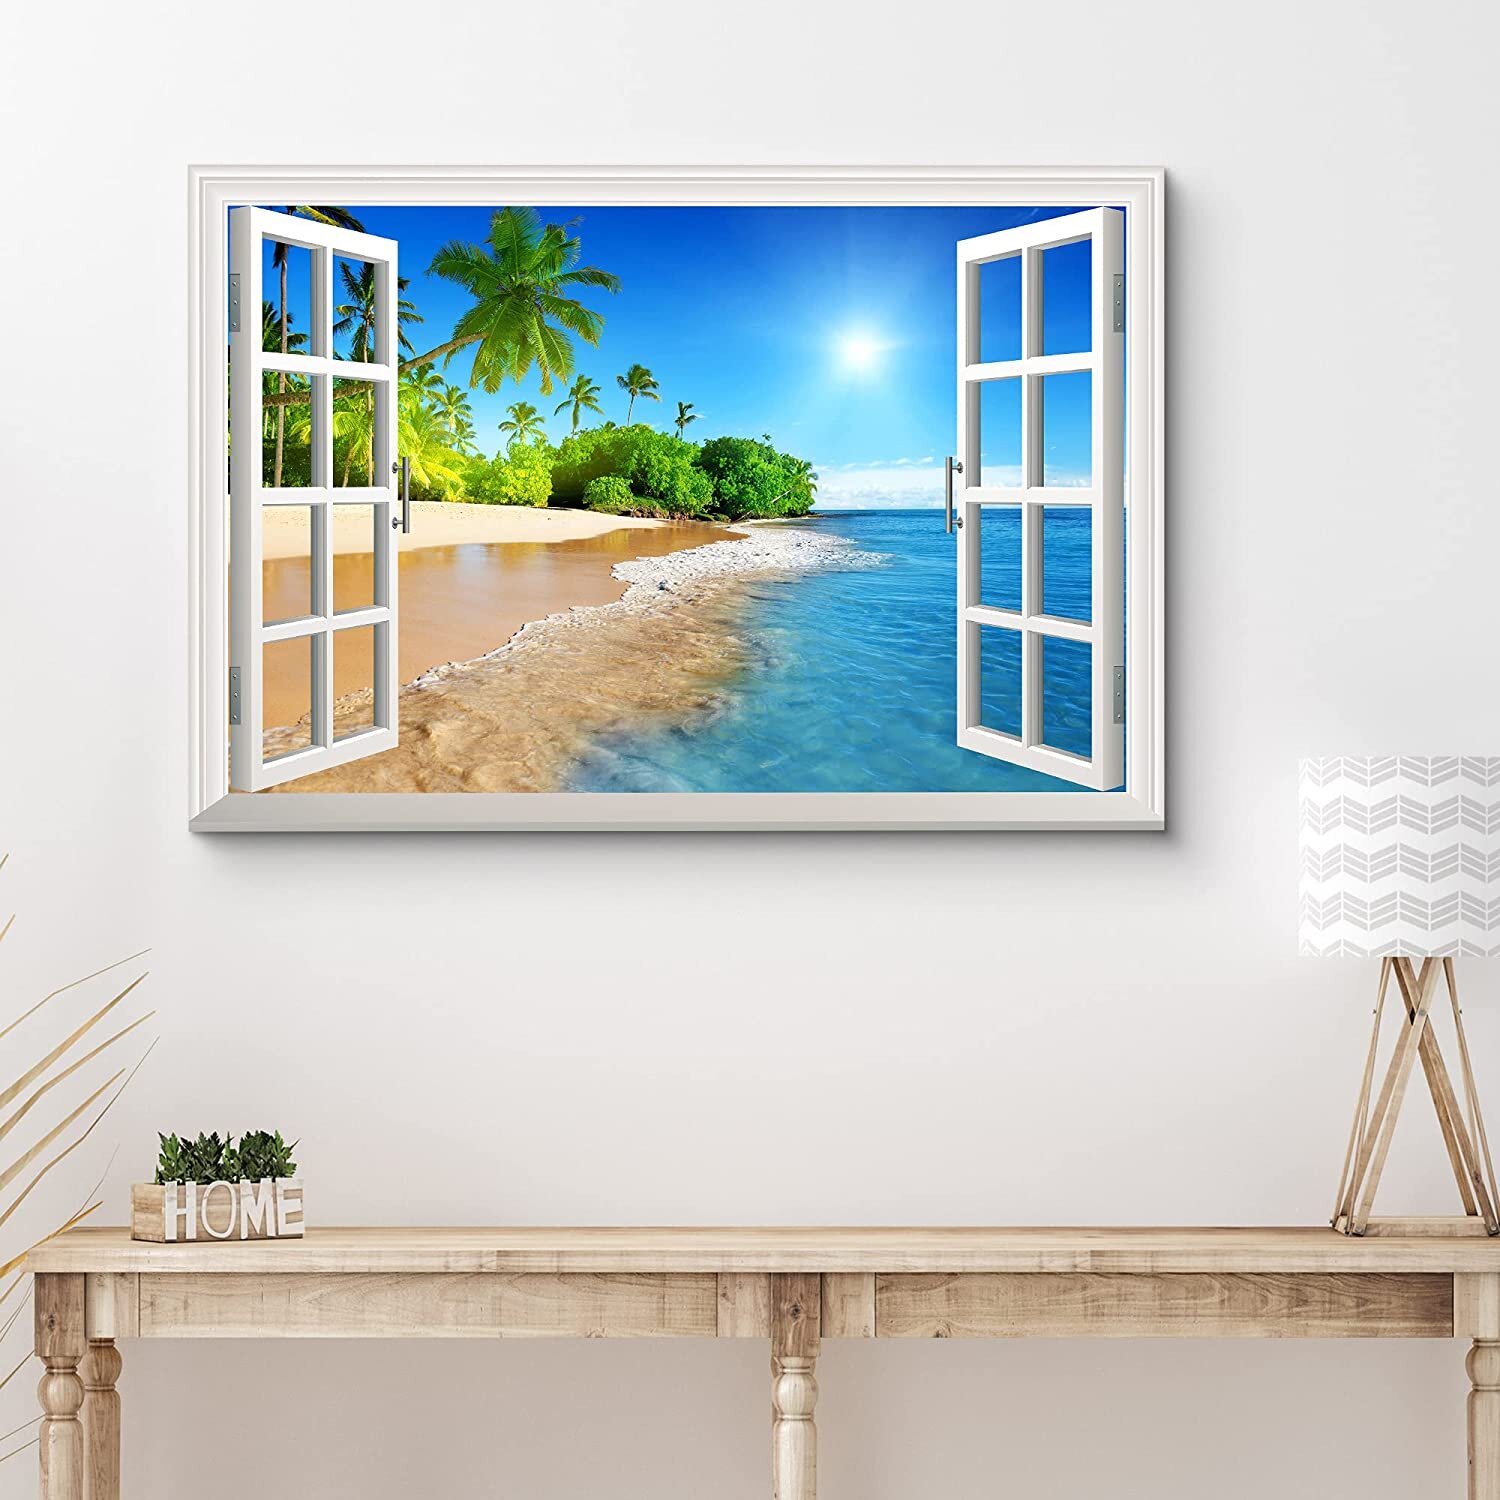 Wall Art For Living Room Large Size Wall Decorations Pictures Blue Sun Beach Grass Ocean Landscape Painting Office Wall Decor Canvas Prints Ready To H - 1